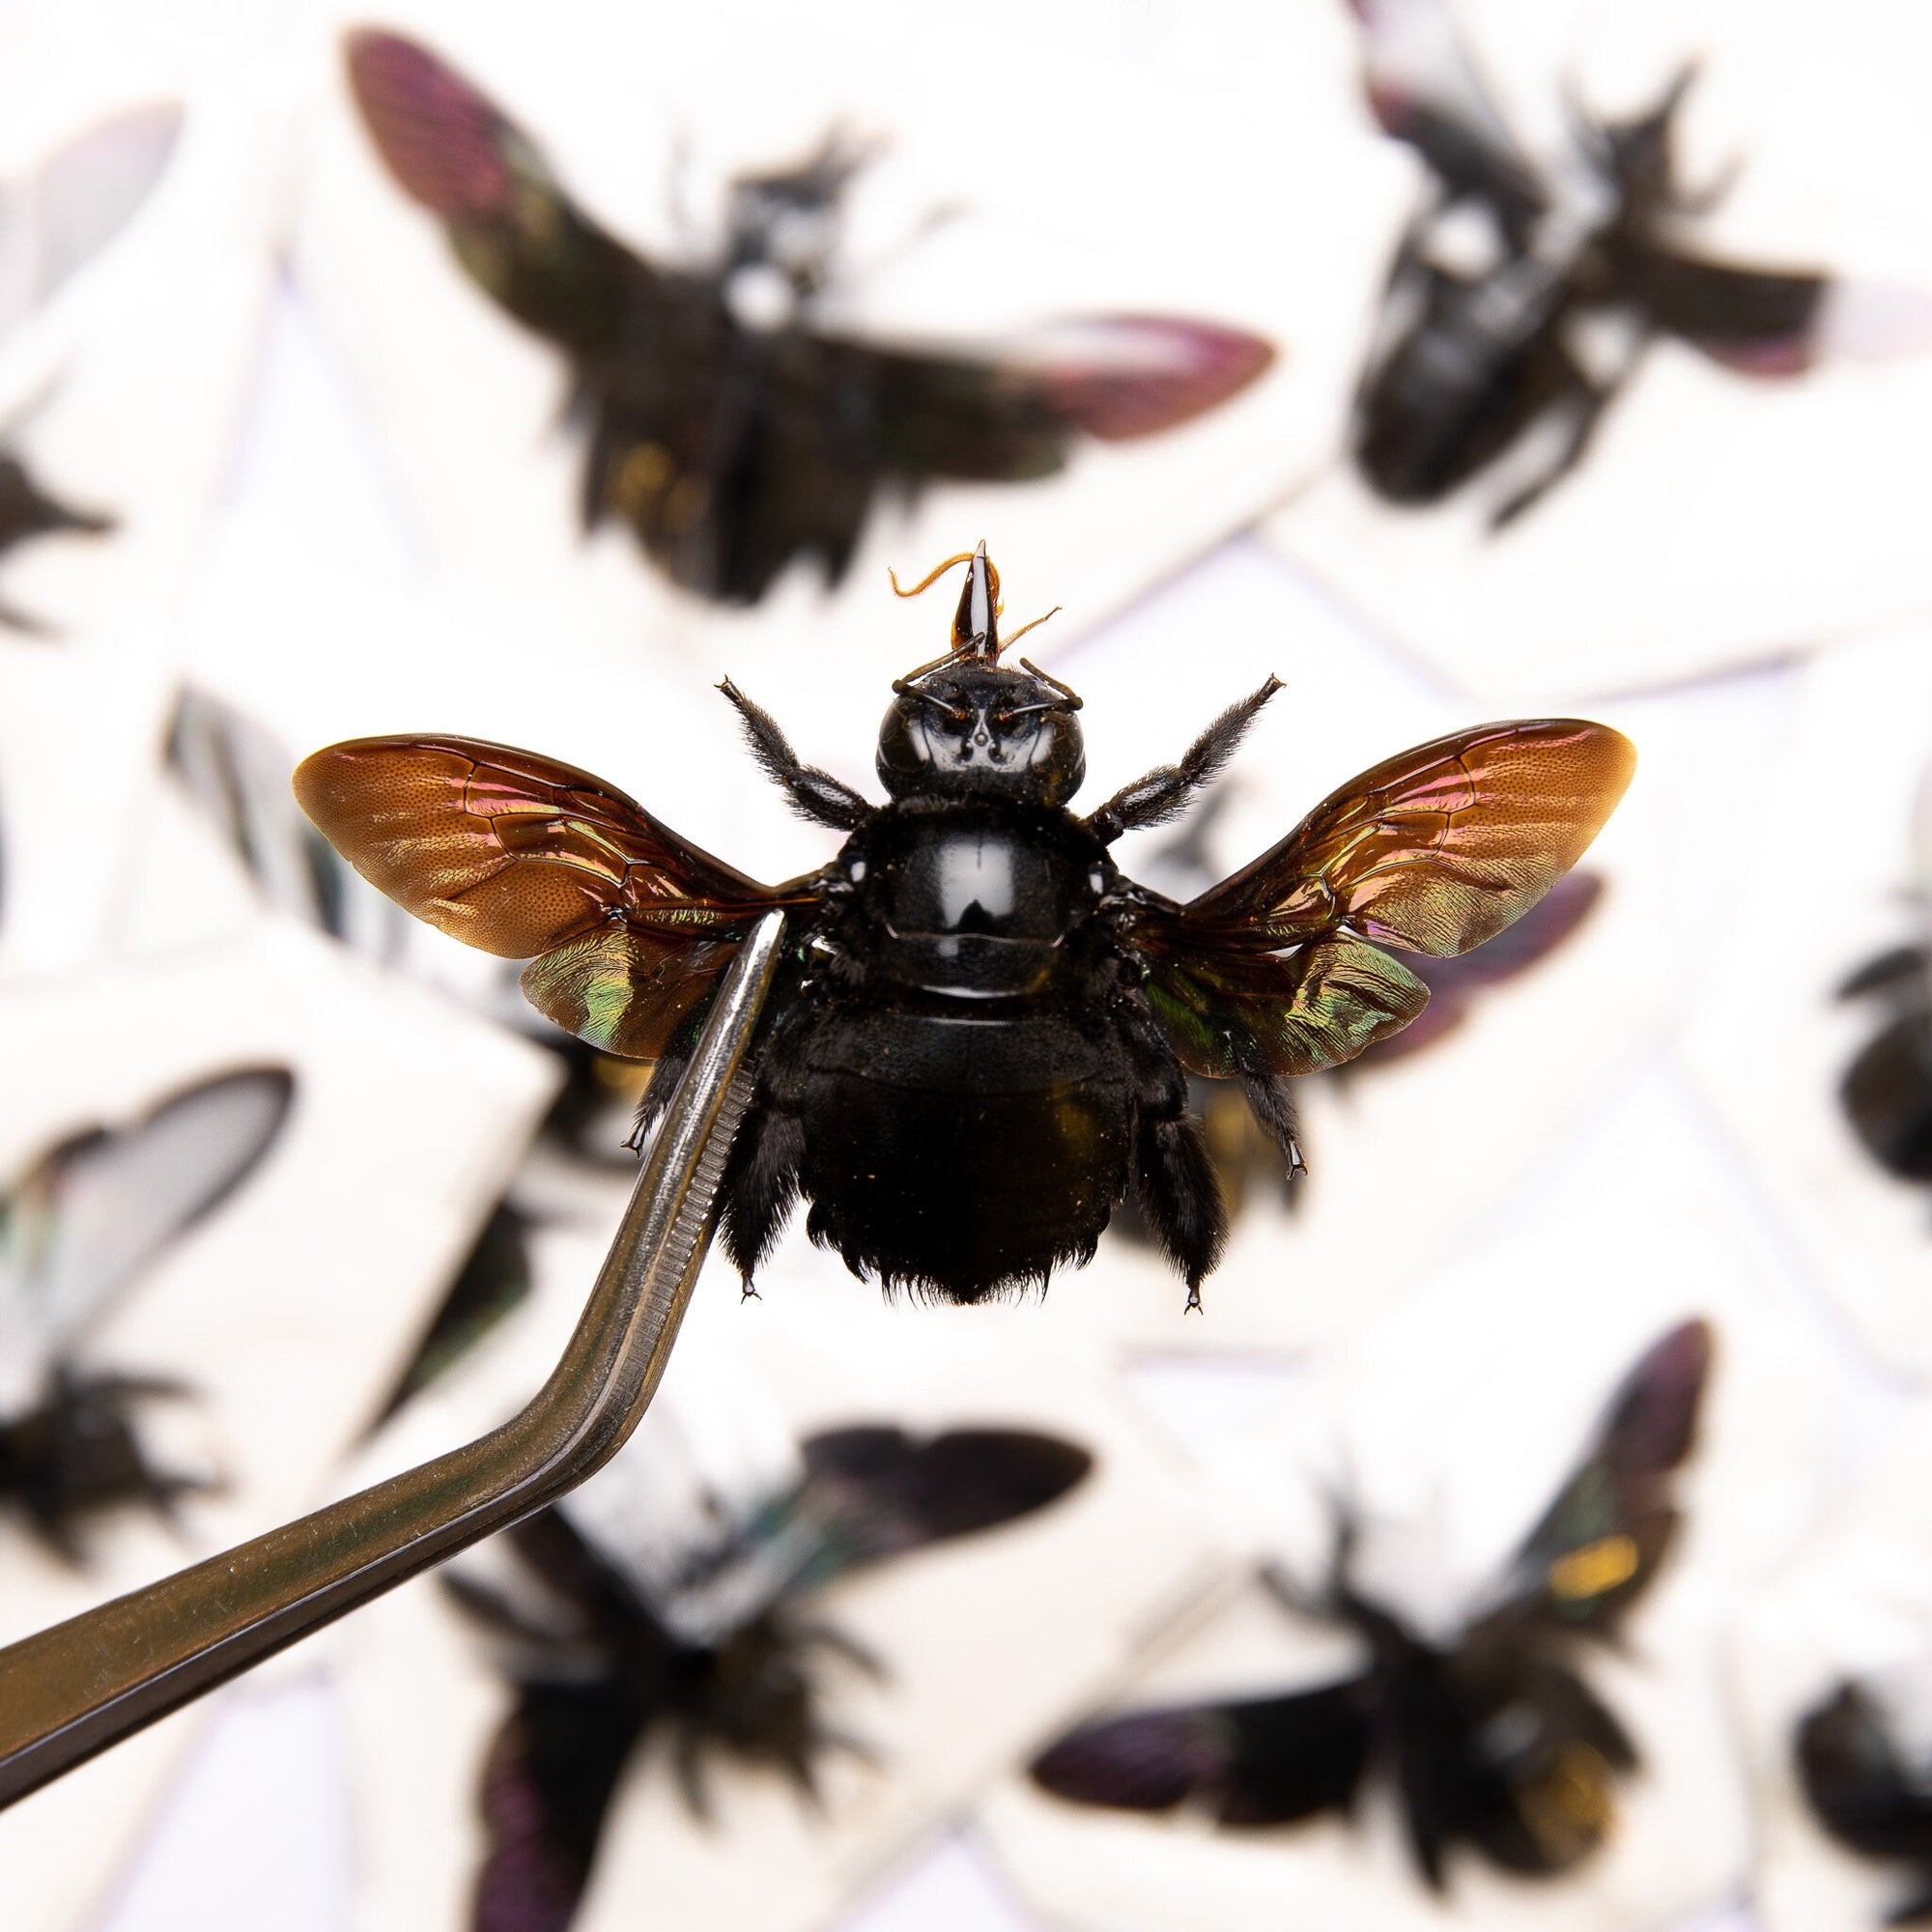 Pack of 10 Giant Black Carpenter Bees (Xylocopa latipes) | A1 Spread Specimens | Dry-preserved Taxidermy